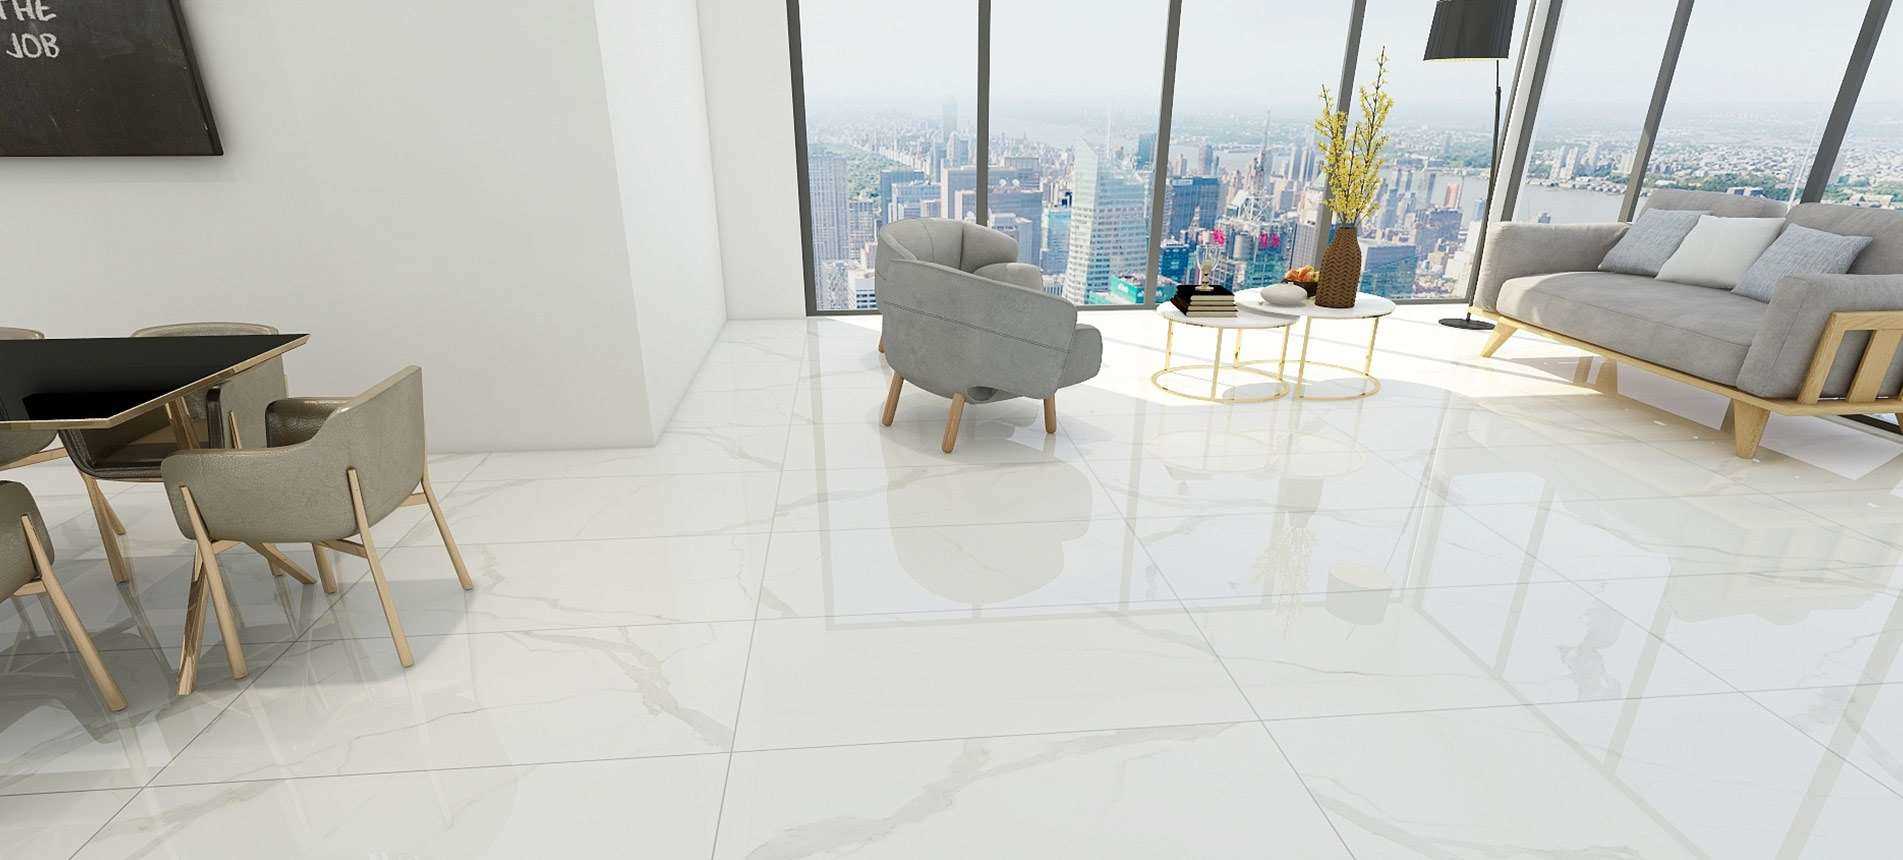 Marble-Look - Architectural Ceramic Tiles